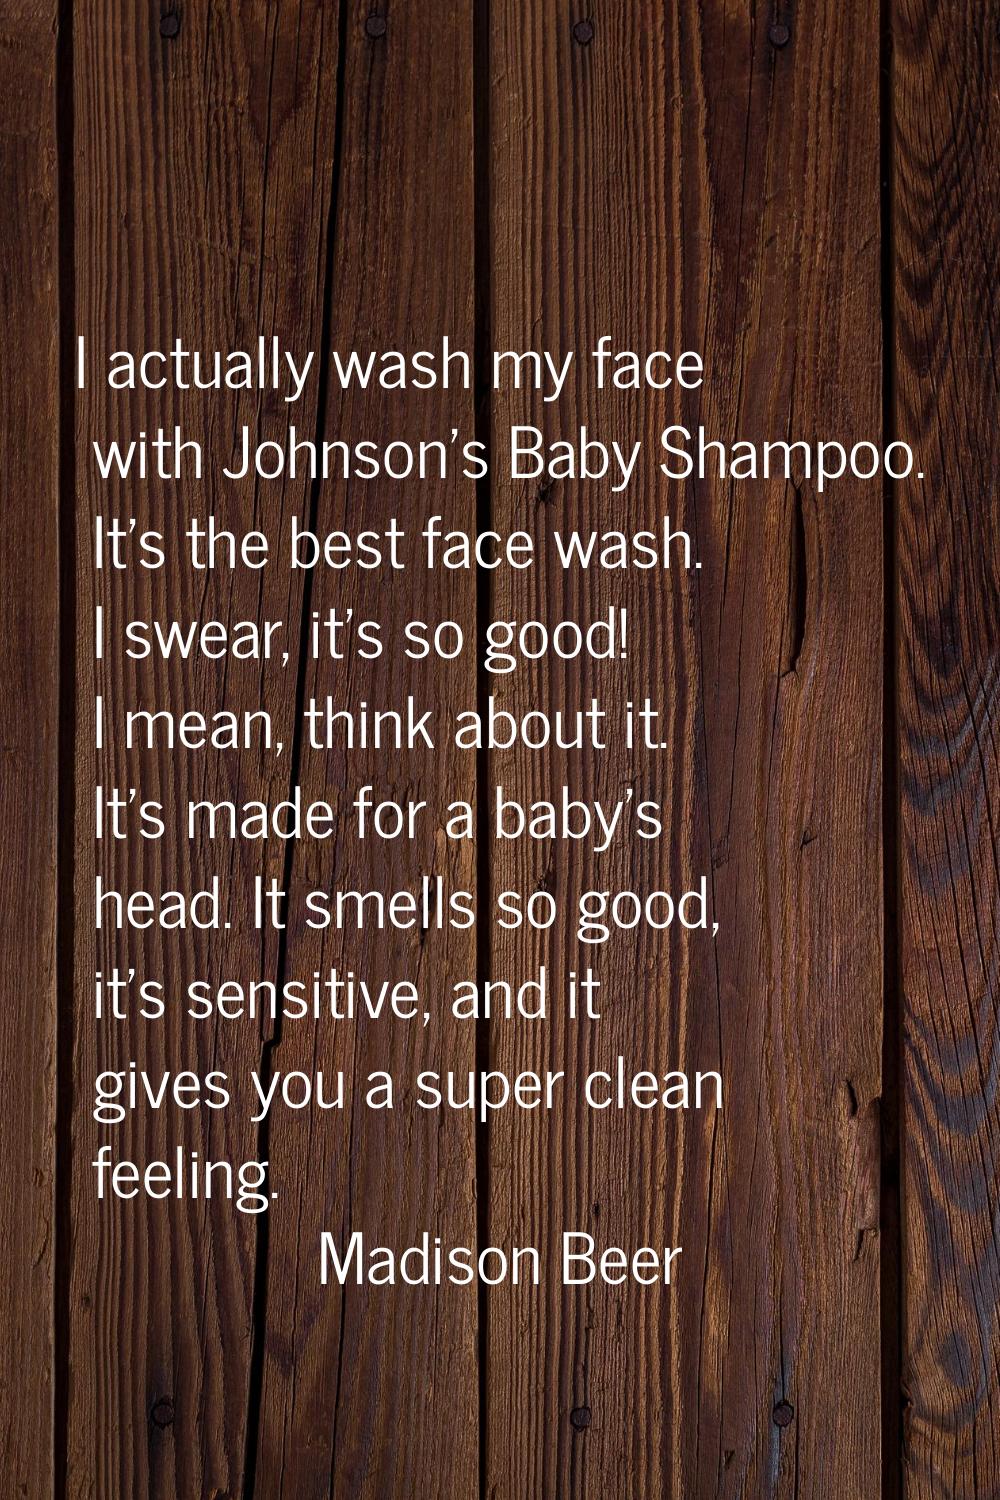 I actually wash my face with Johnson's Baby Shampoo. It's the best face wash. I swear, it's so good